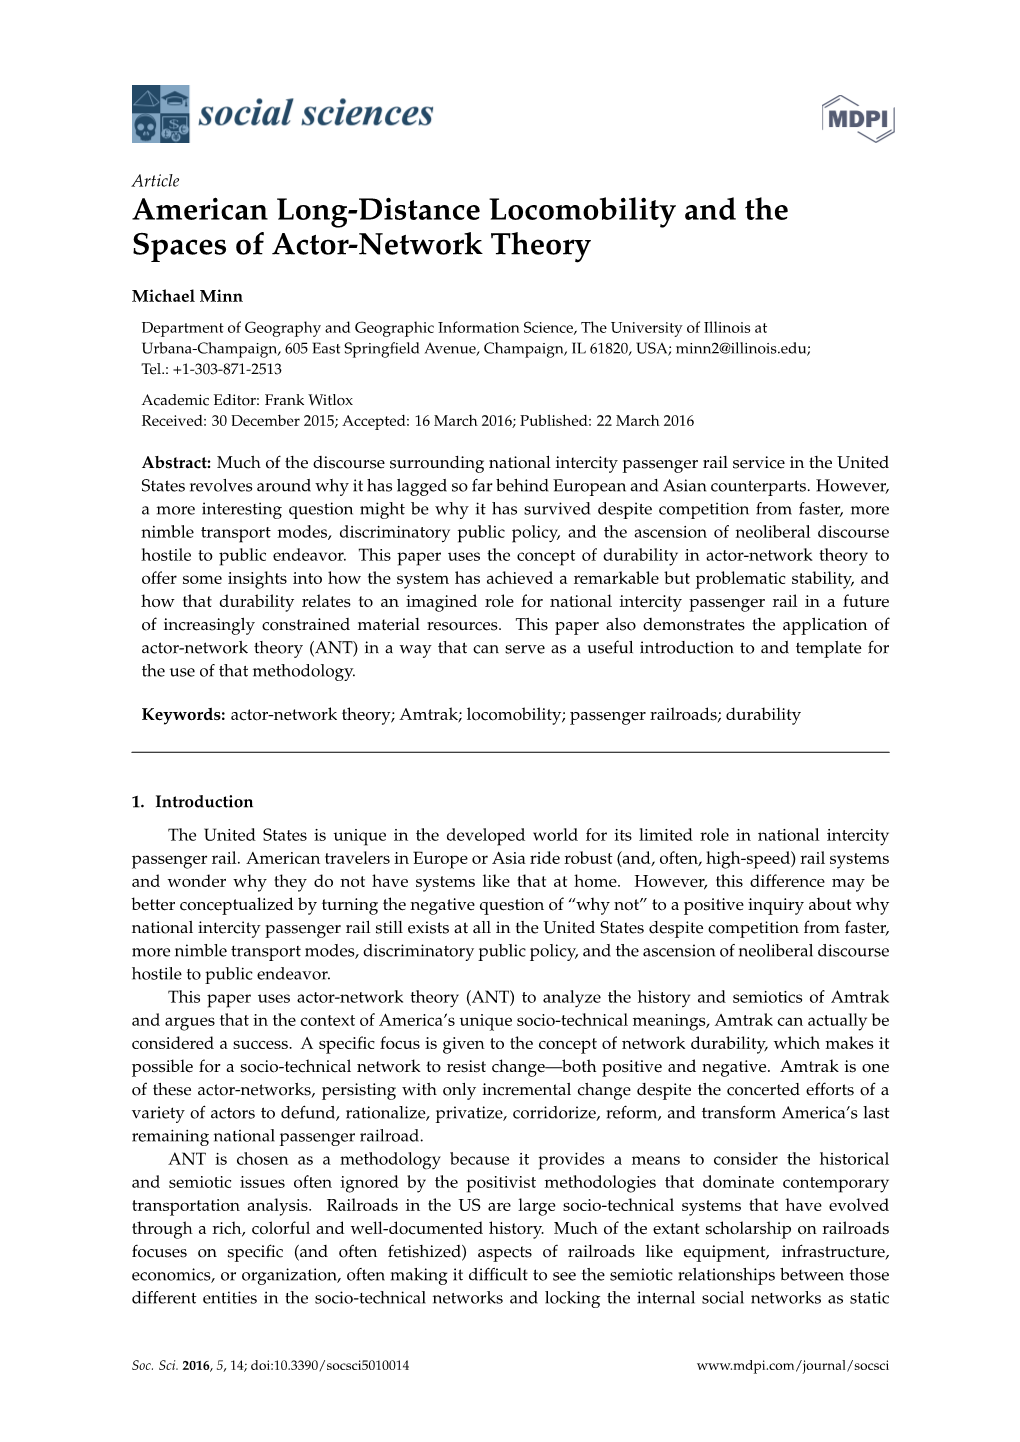 American Long-Distance Locomobility and the Spaces of Actor-Network Theory